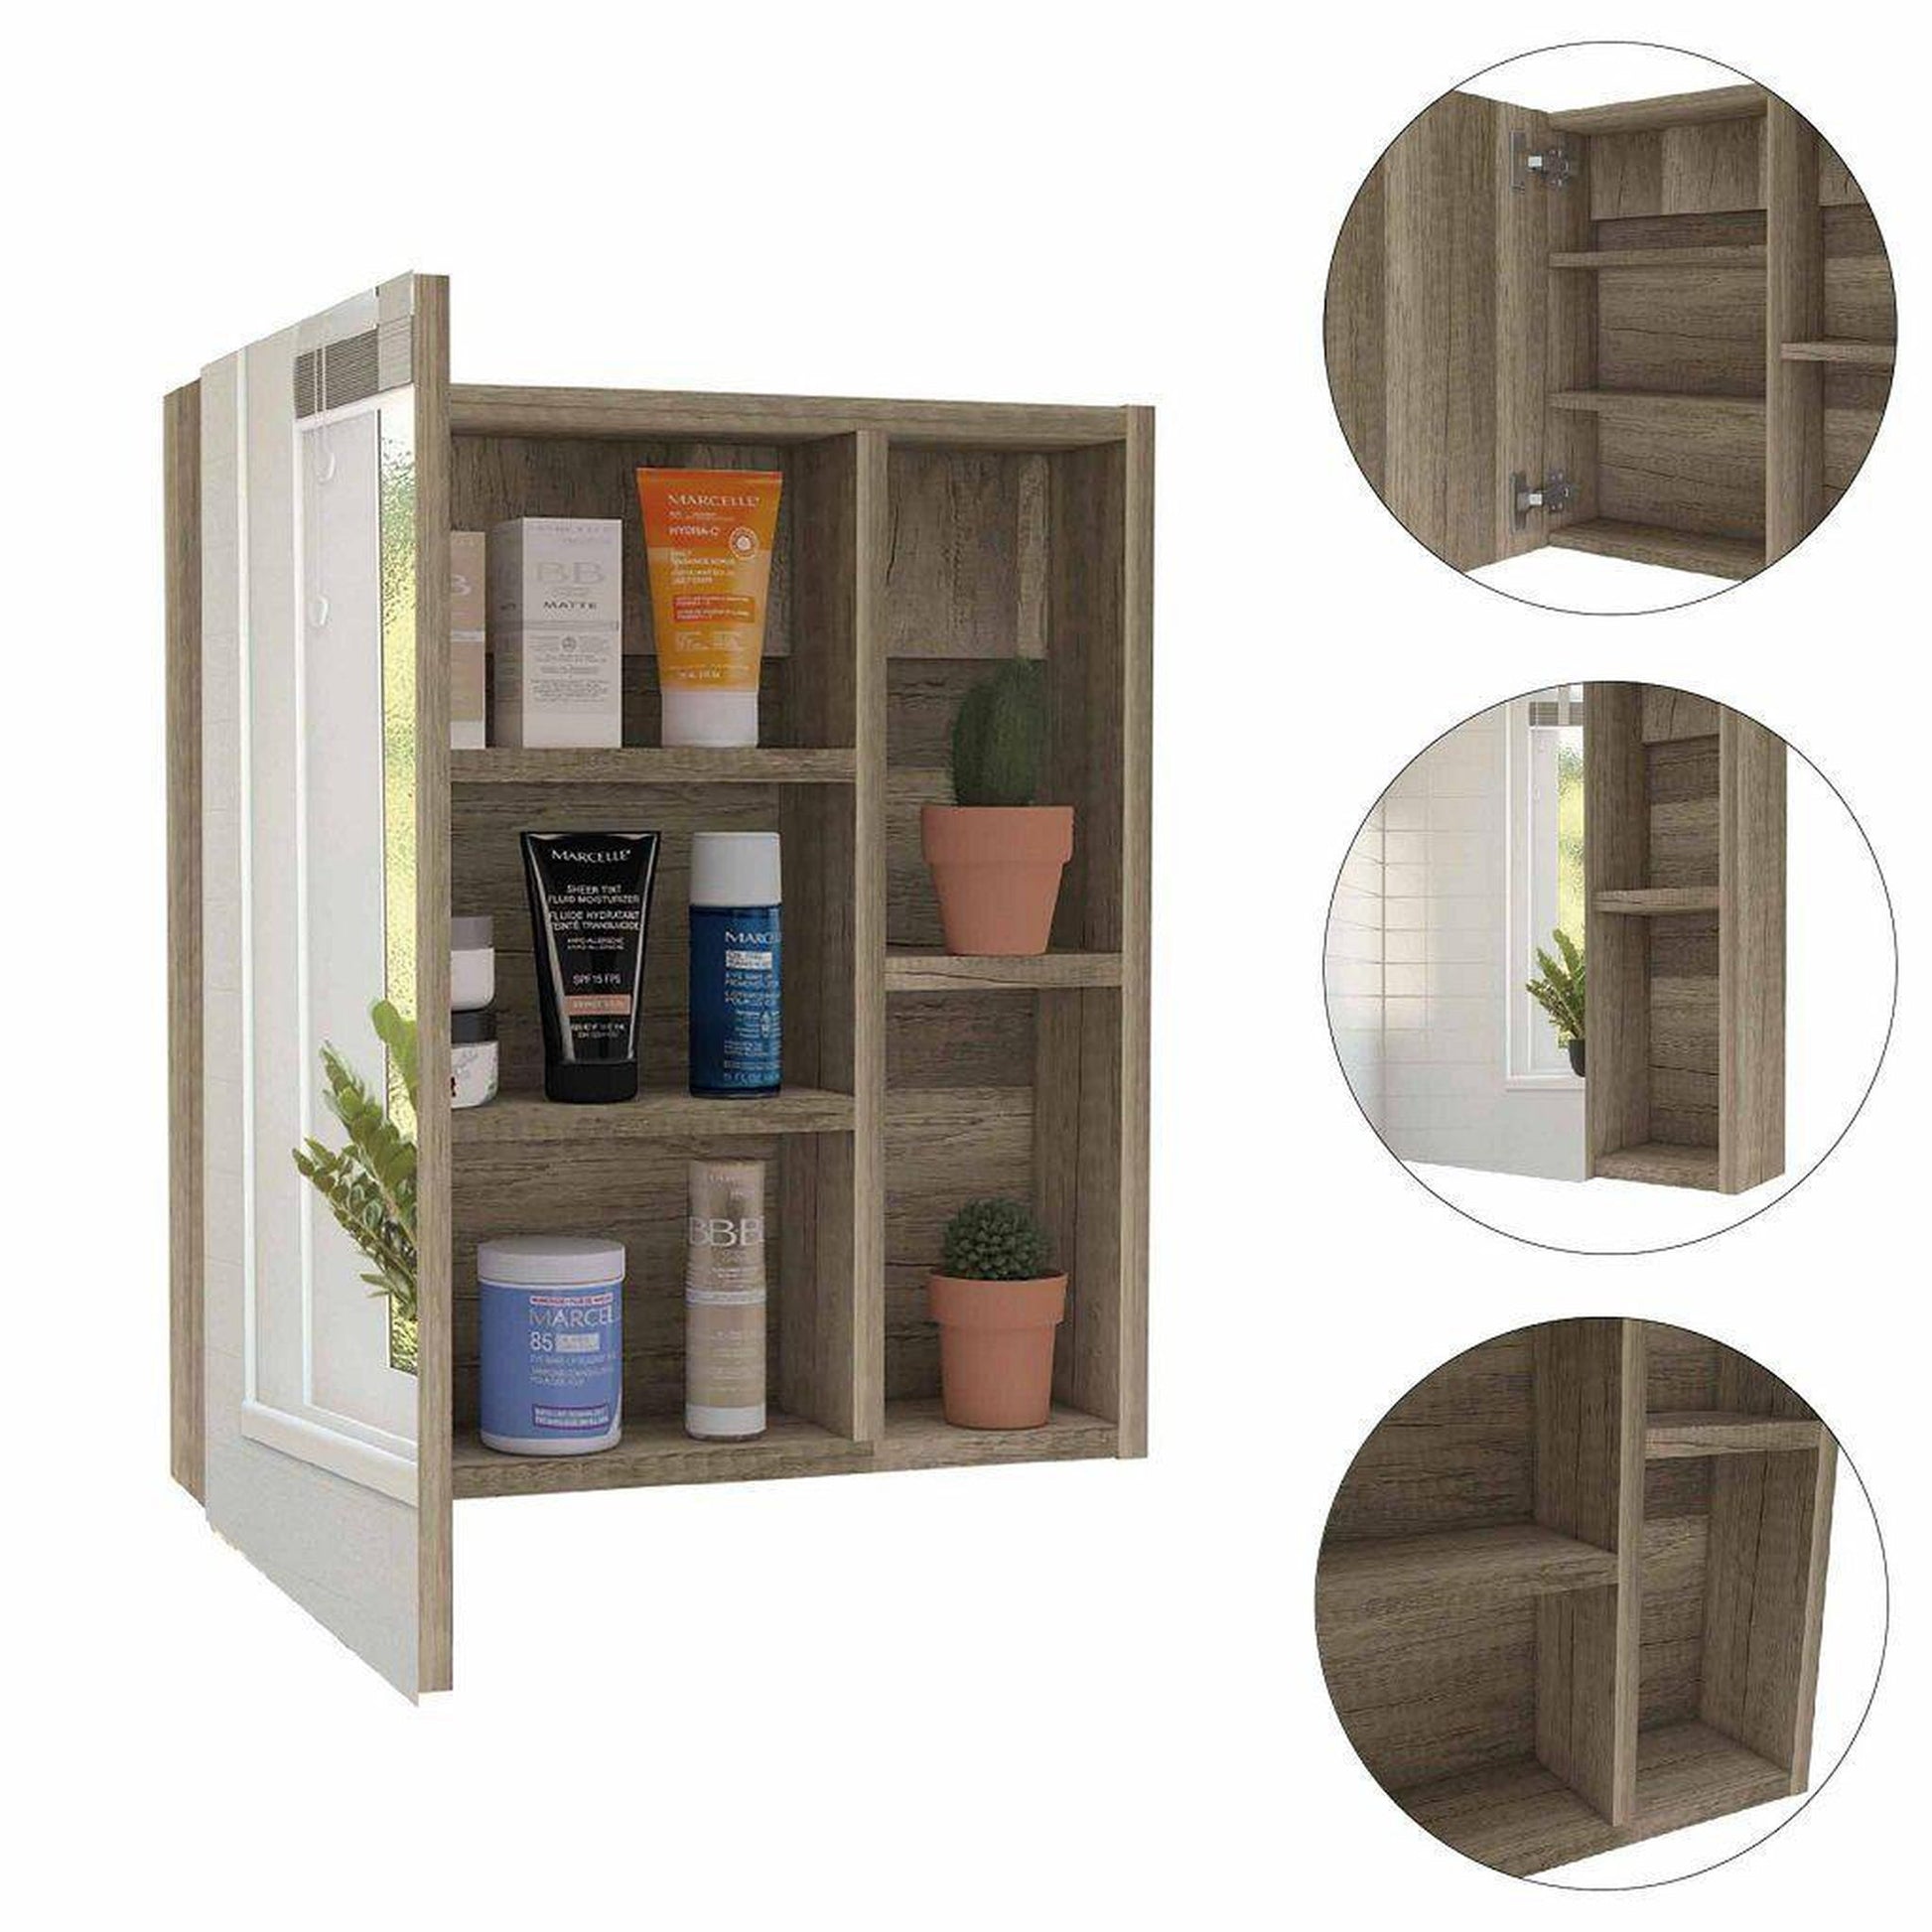 TUHOME Labelle 18" x 20" Weathered Oak Wall-Mounted Mirror Medicine Cabinet With 2 Open Shelves